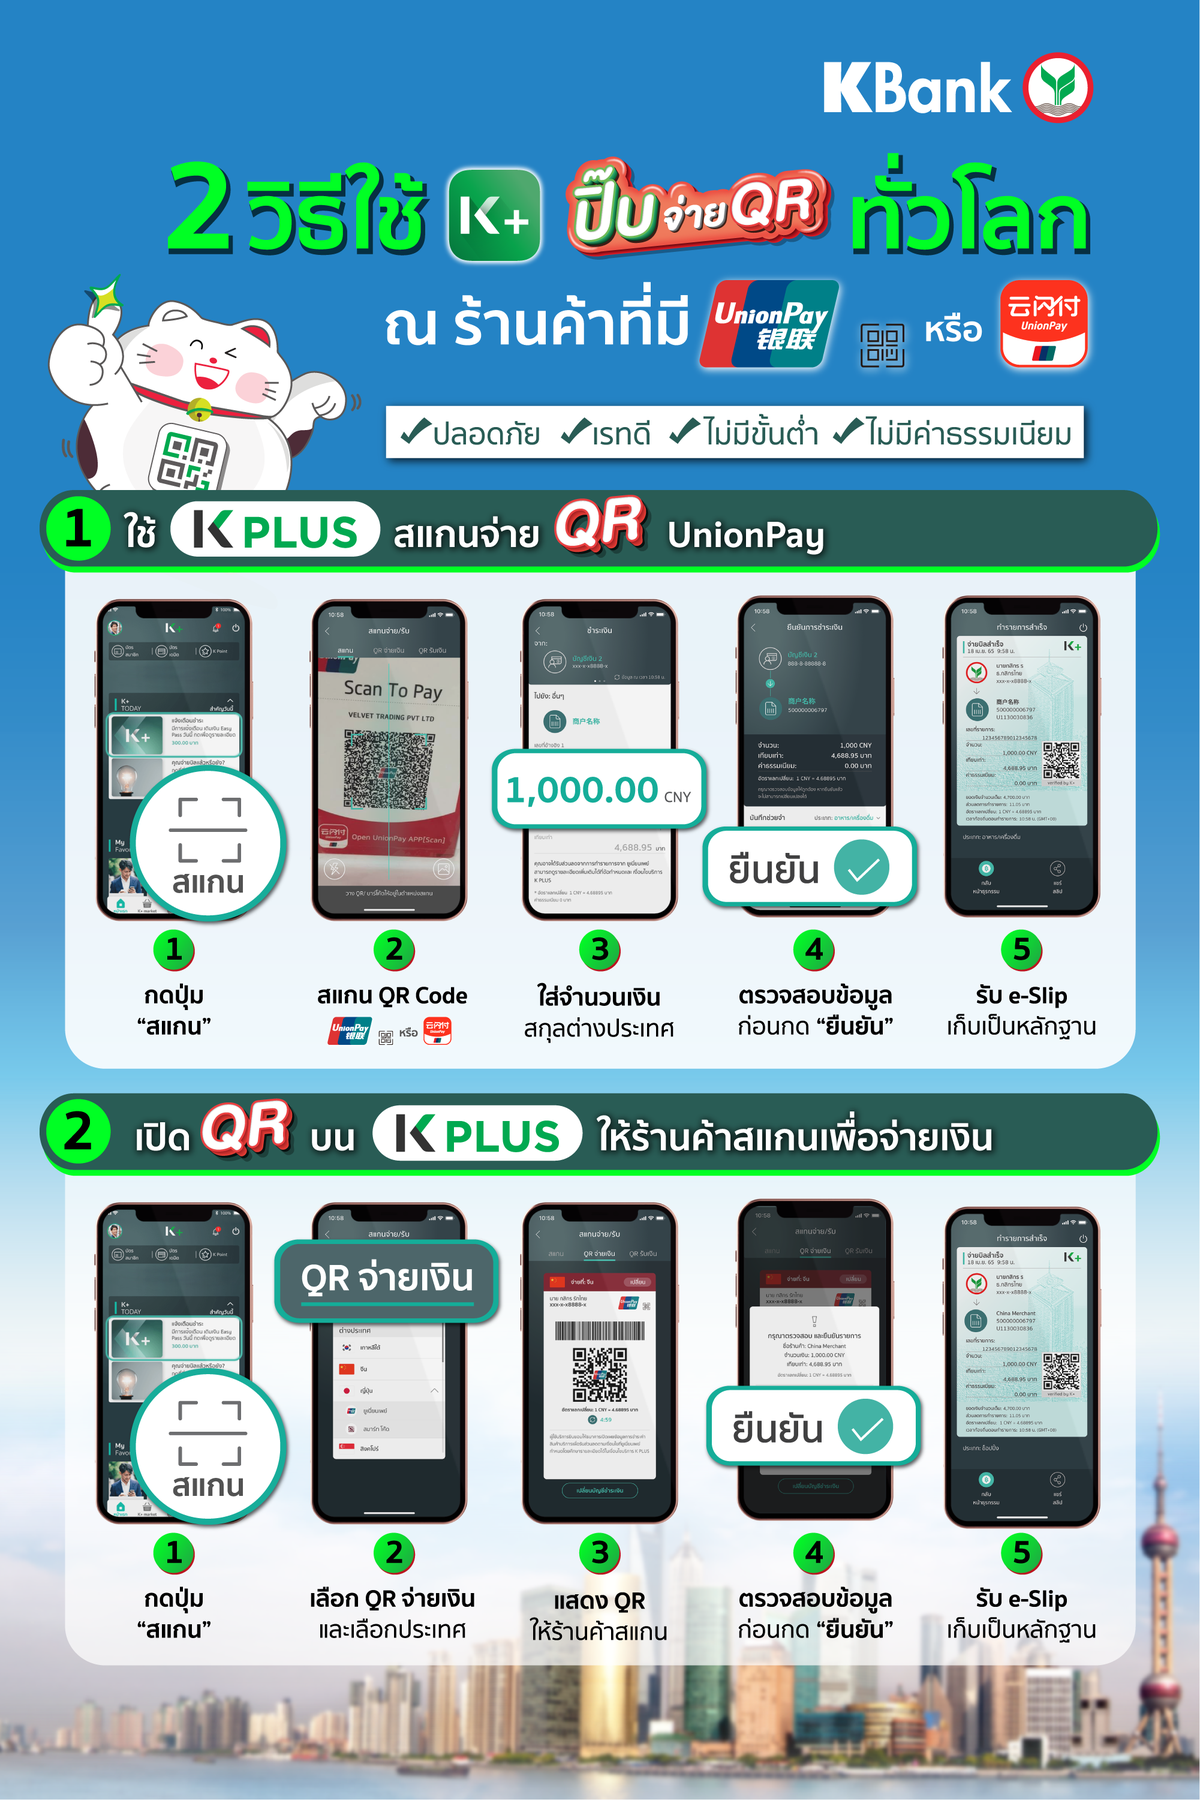 K PLUS users can now make payments via scanning UnionPay QR Code at more than 30 million merchants in more than 40 countries/regions